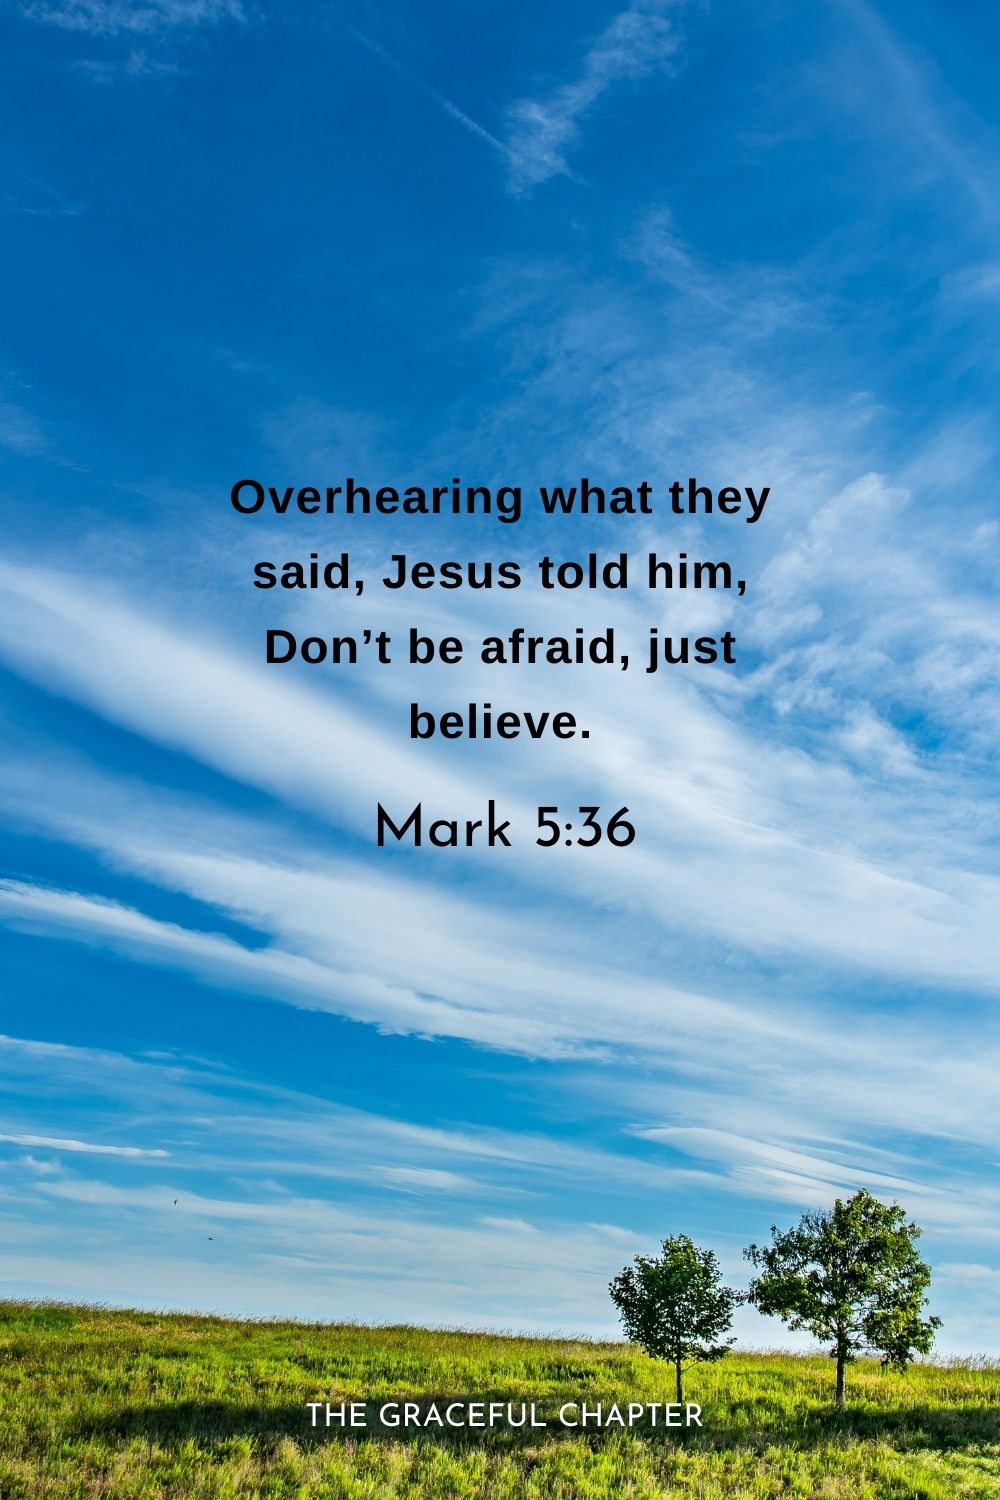 Overhearing what they said, Jesus told him, Don’t be afraid, just believe.